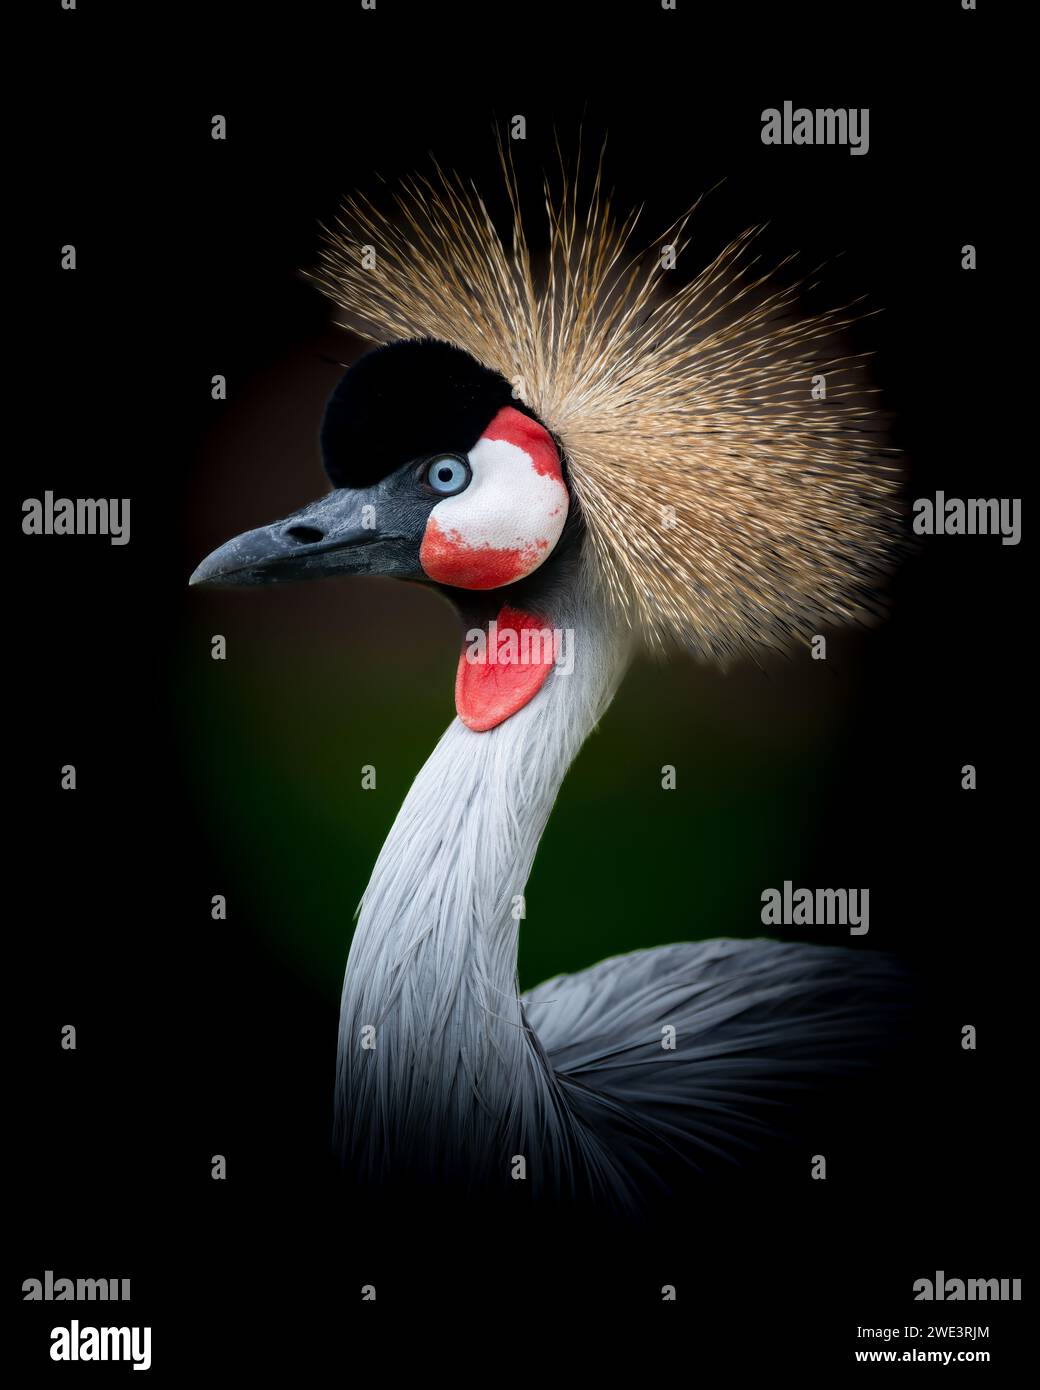 An eastern crowned crane with vibrant red eyes and exquisite plumage Stock Photo